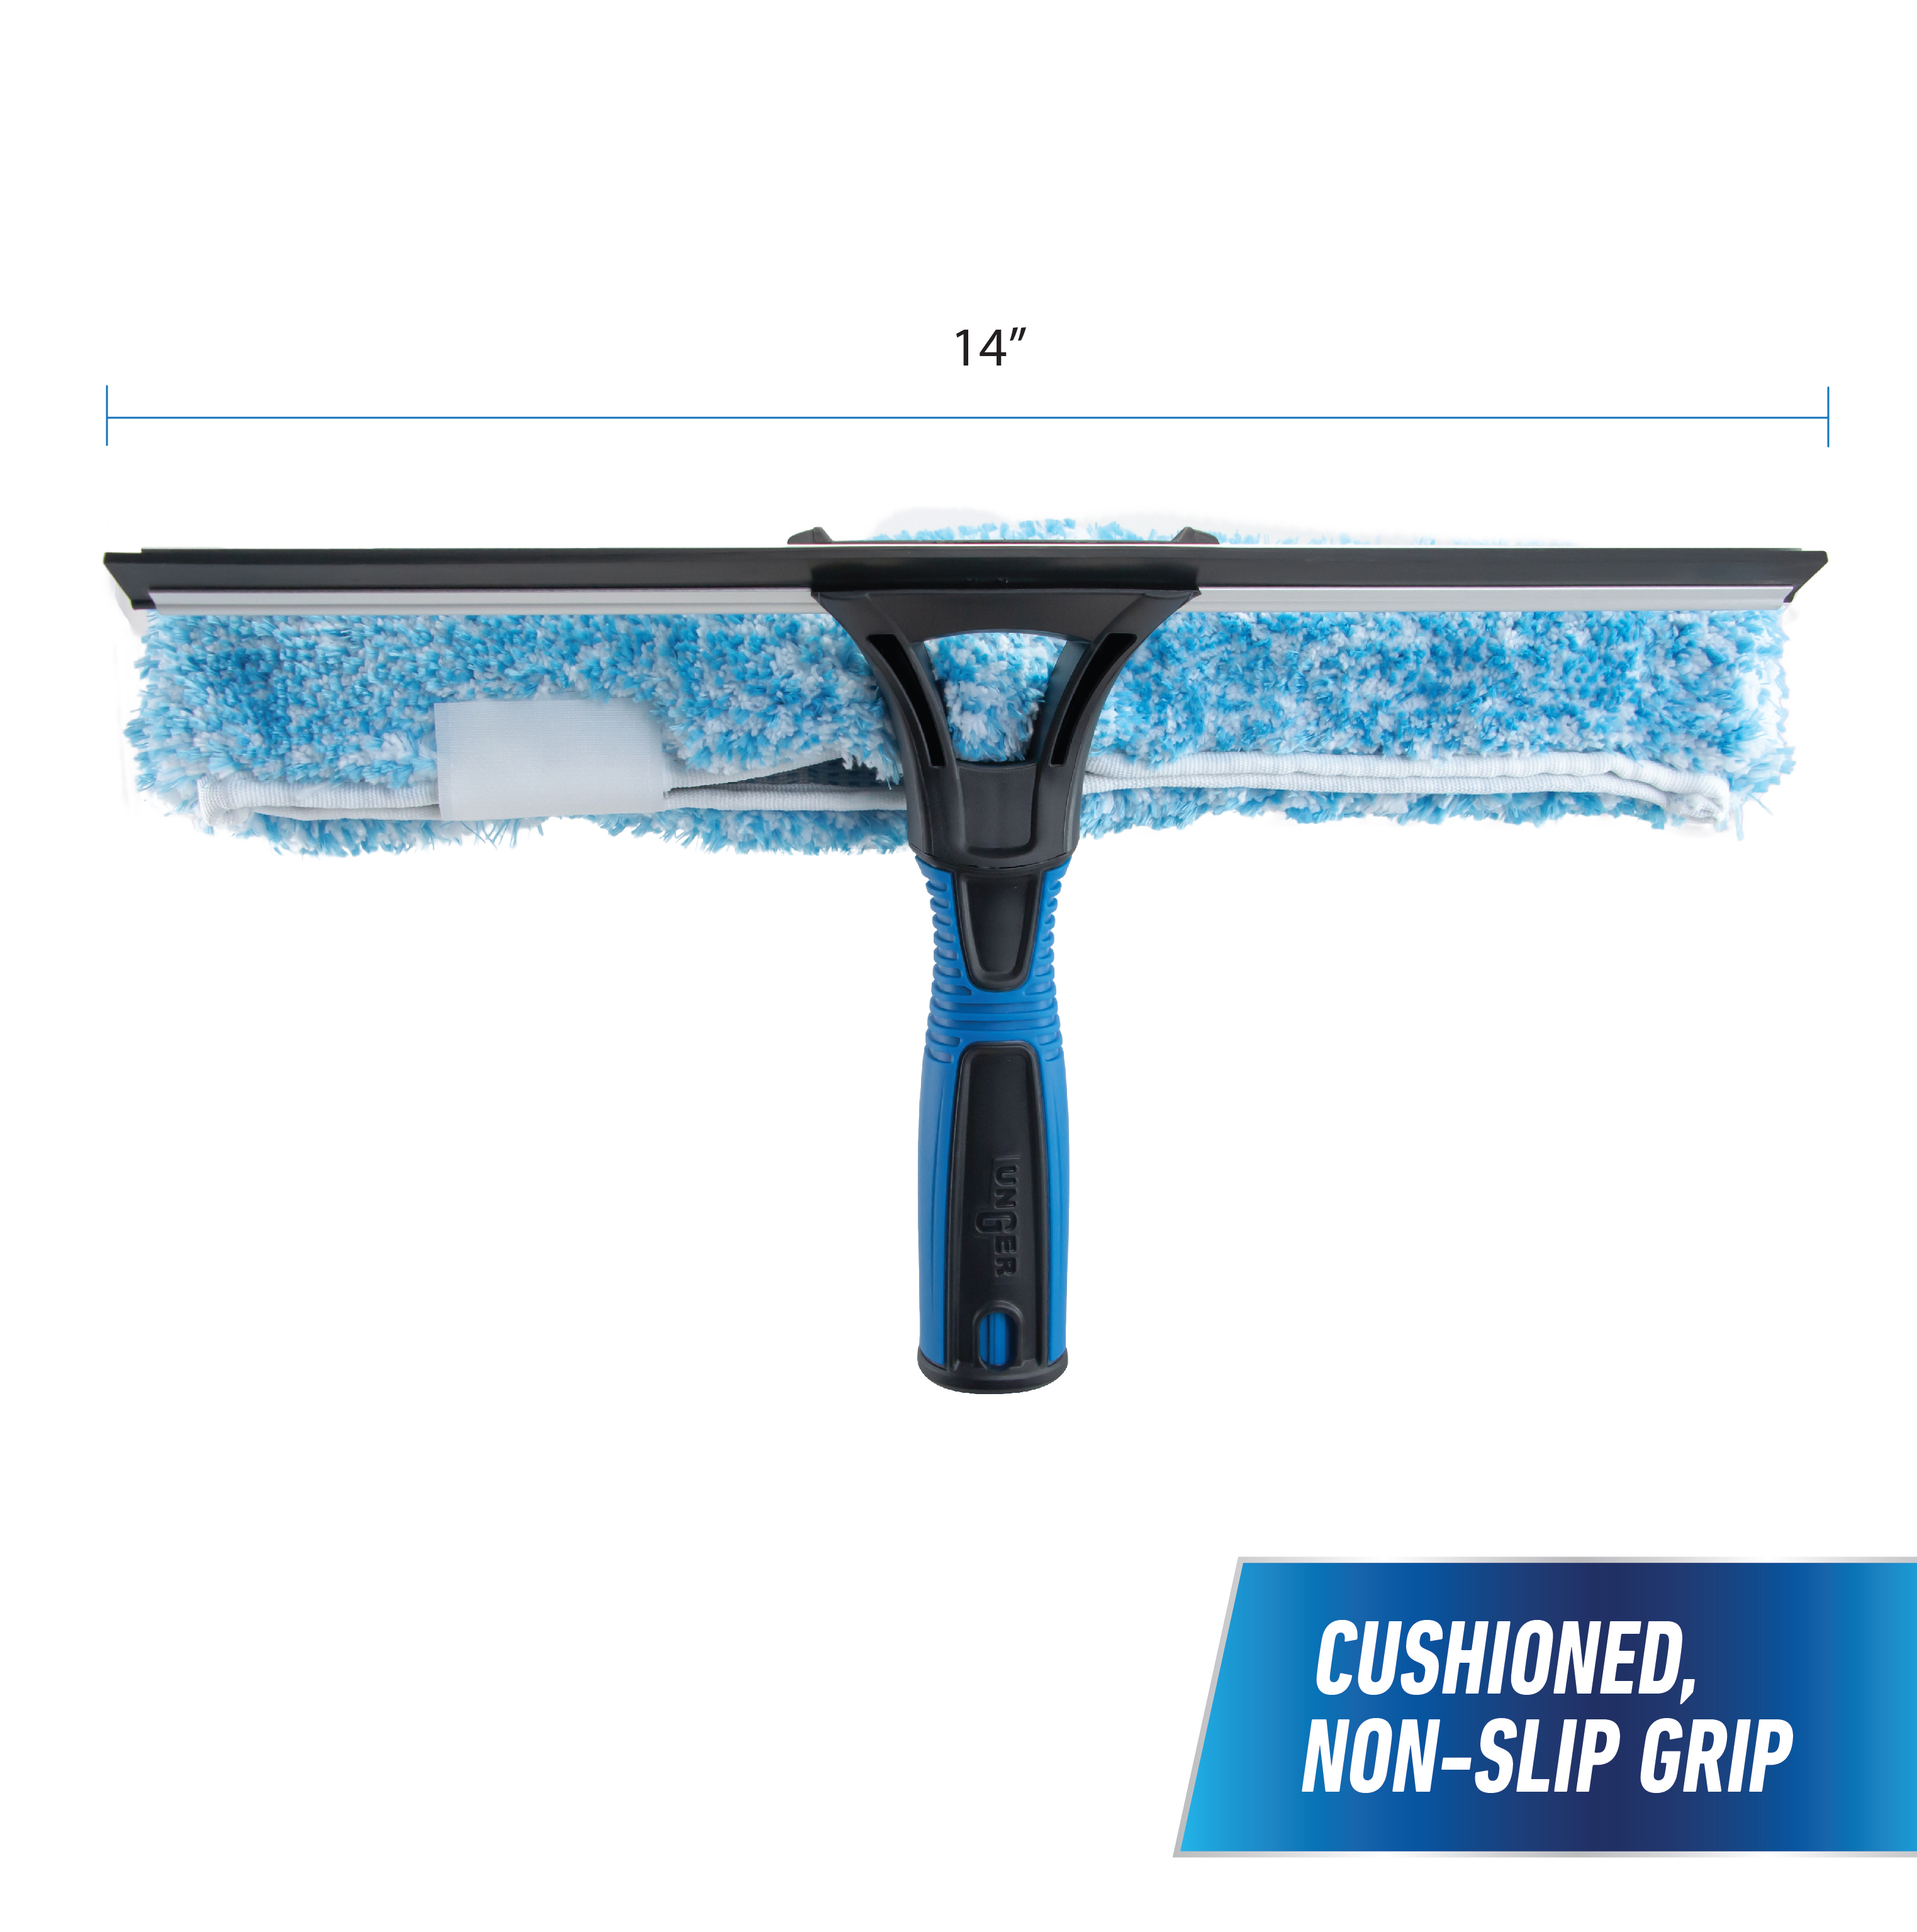 981640_UI_Unger Pro_14 inch 2-in-1 Window Cleaner_Product Feature 4